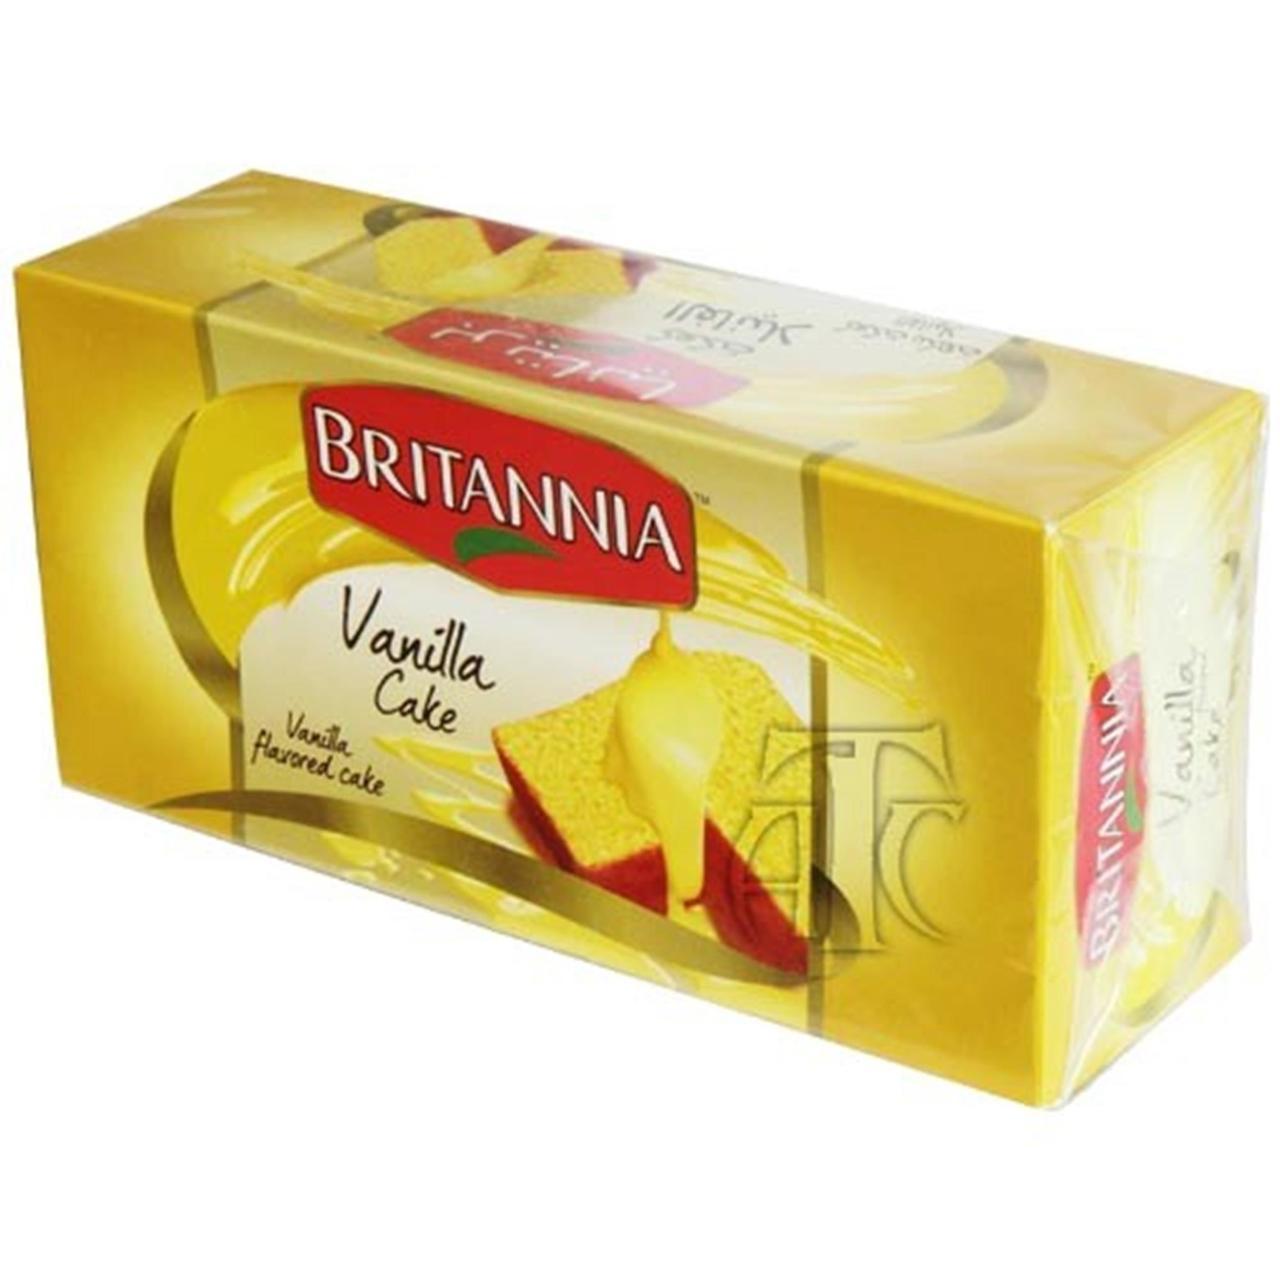 Amazon.com: BRITANNIA Gobbles Egg Less Fruit Cake 9.7oz (275g) -  Delightfully Smooth, Soft and Delicious Cake - Breakfast & Tea Time Snacks  - Suitable for Vegetarians (Pack of 6) : Grocery & Gourmet Food